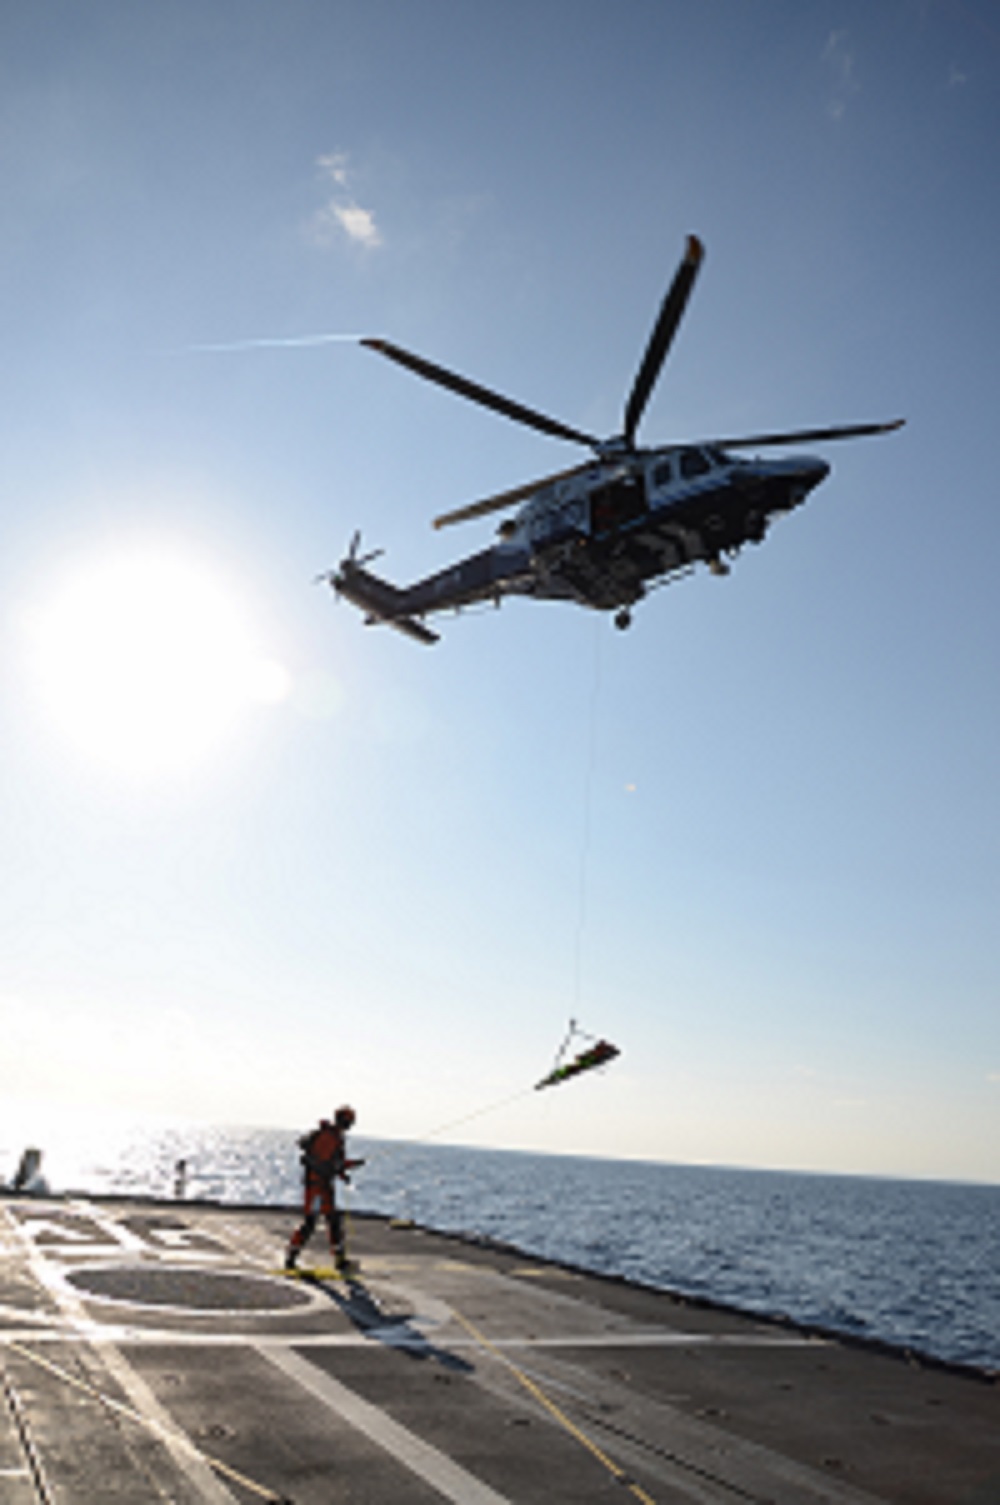 Joint Search and Rescue (SAR) Exercise
SAREX “CYFRA - 01/18”